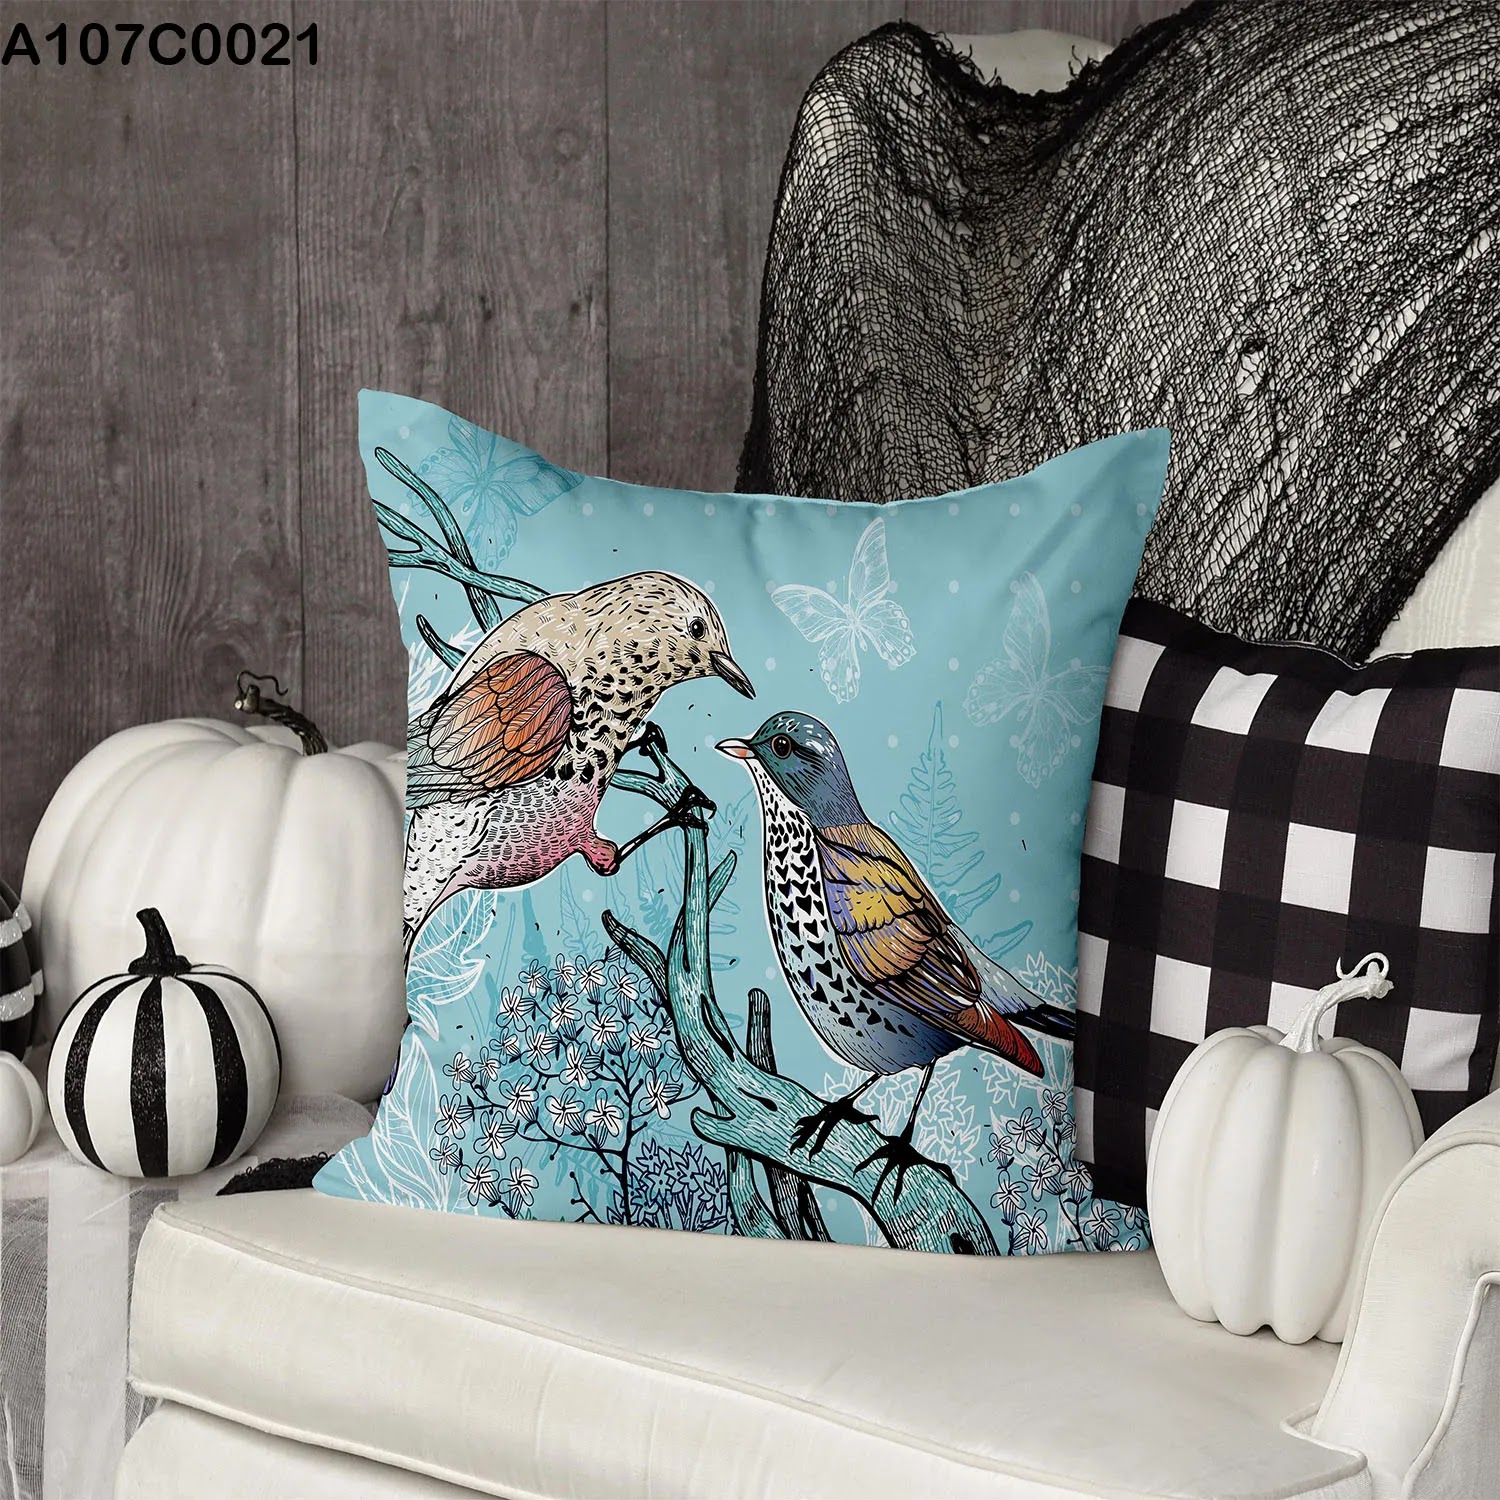 Light blue pillow case with two birds on a branch